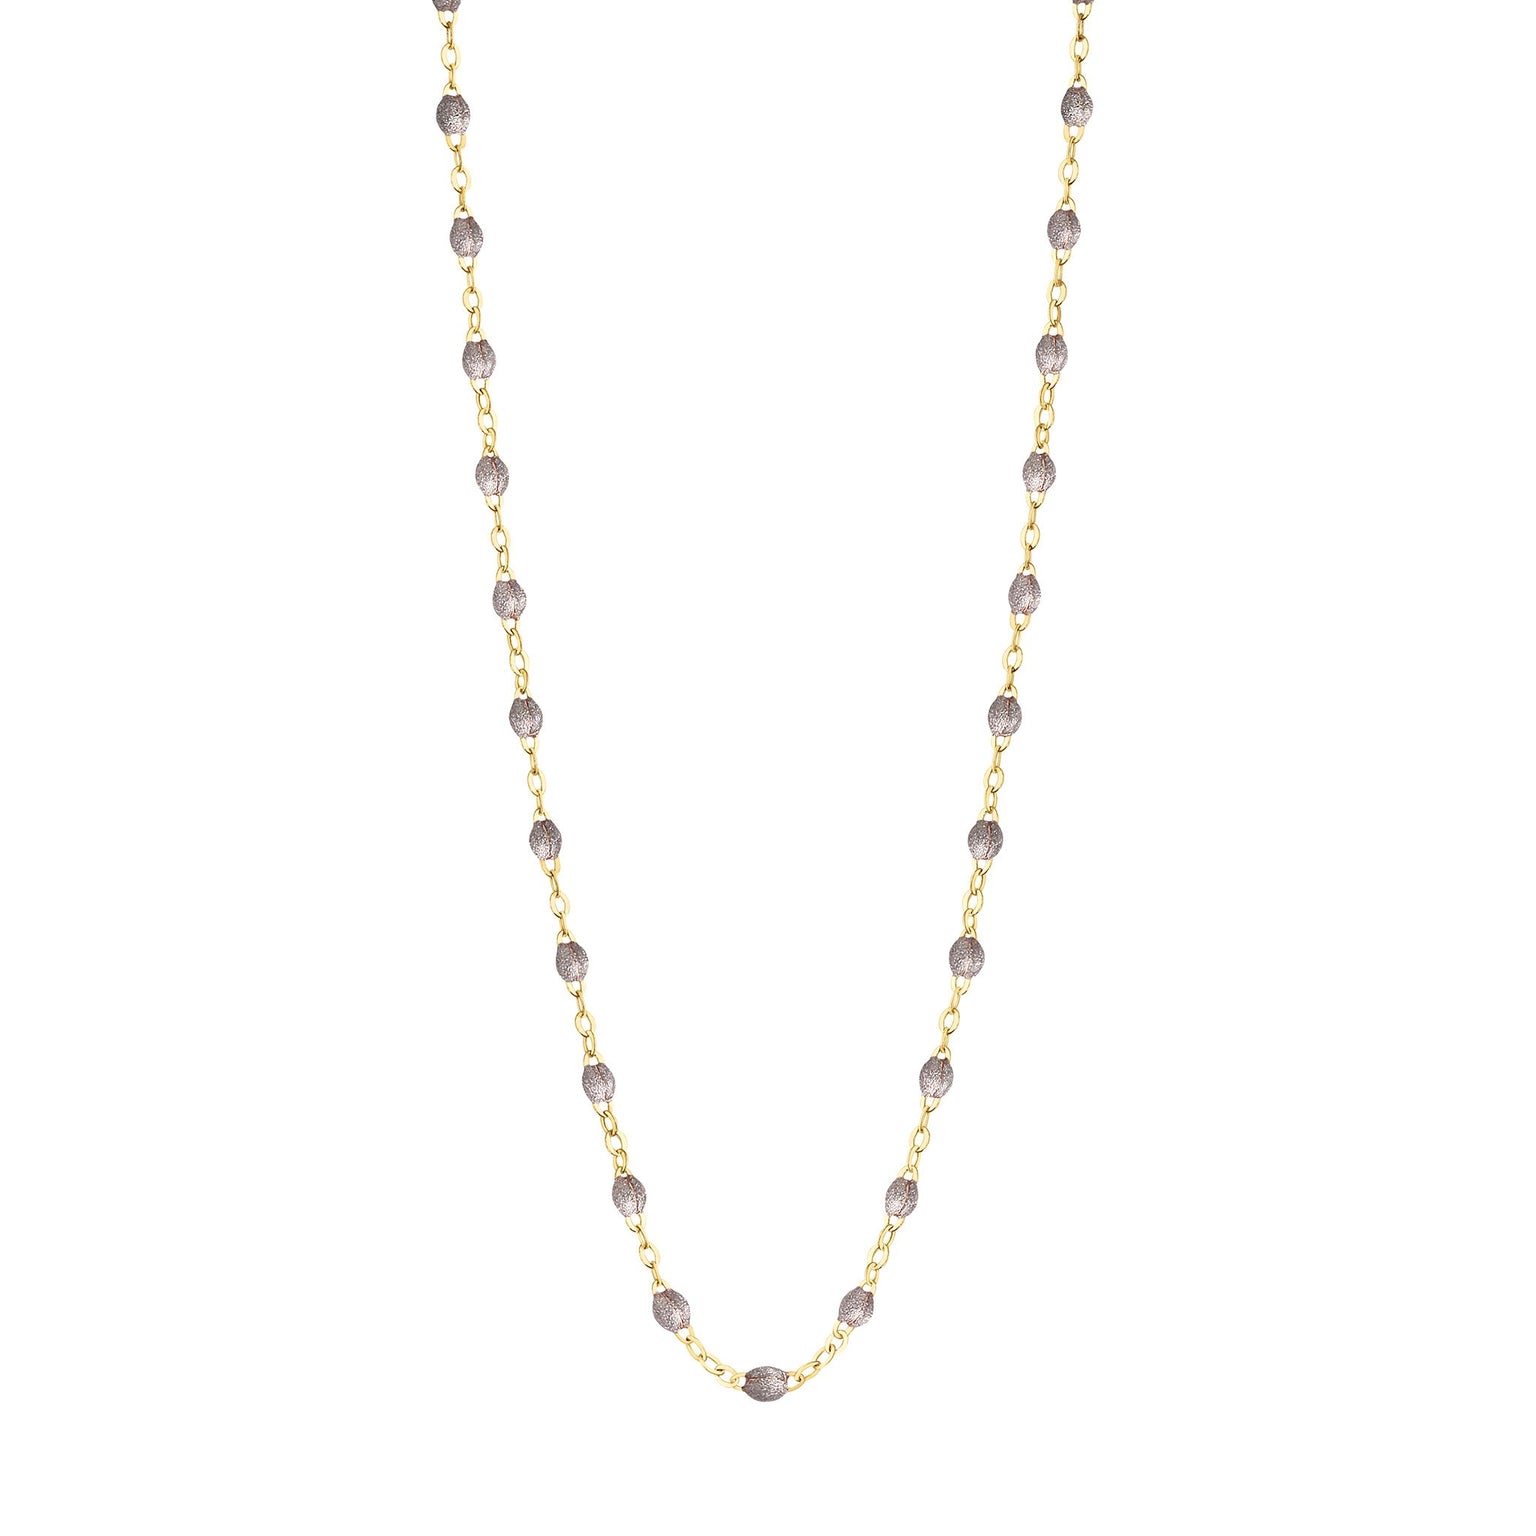 Buy 24K Gold Filled Curb Chain Necklace for Jewelry Making, Everyday Wear  Layering Necklace 15.7 Inches, 17.7 Inches, or 19.7 Inches Online in India  - Etsy